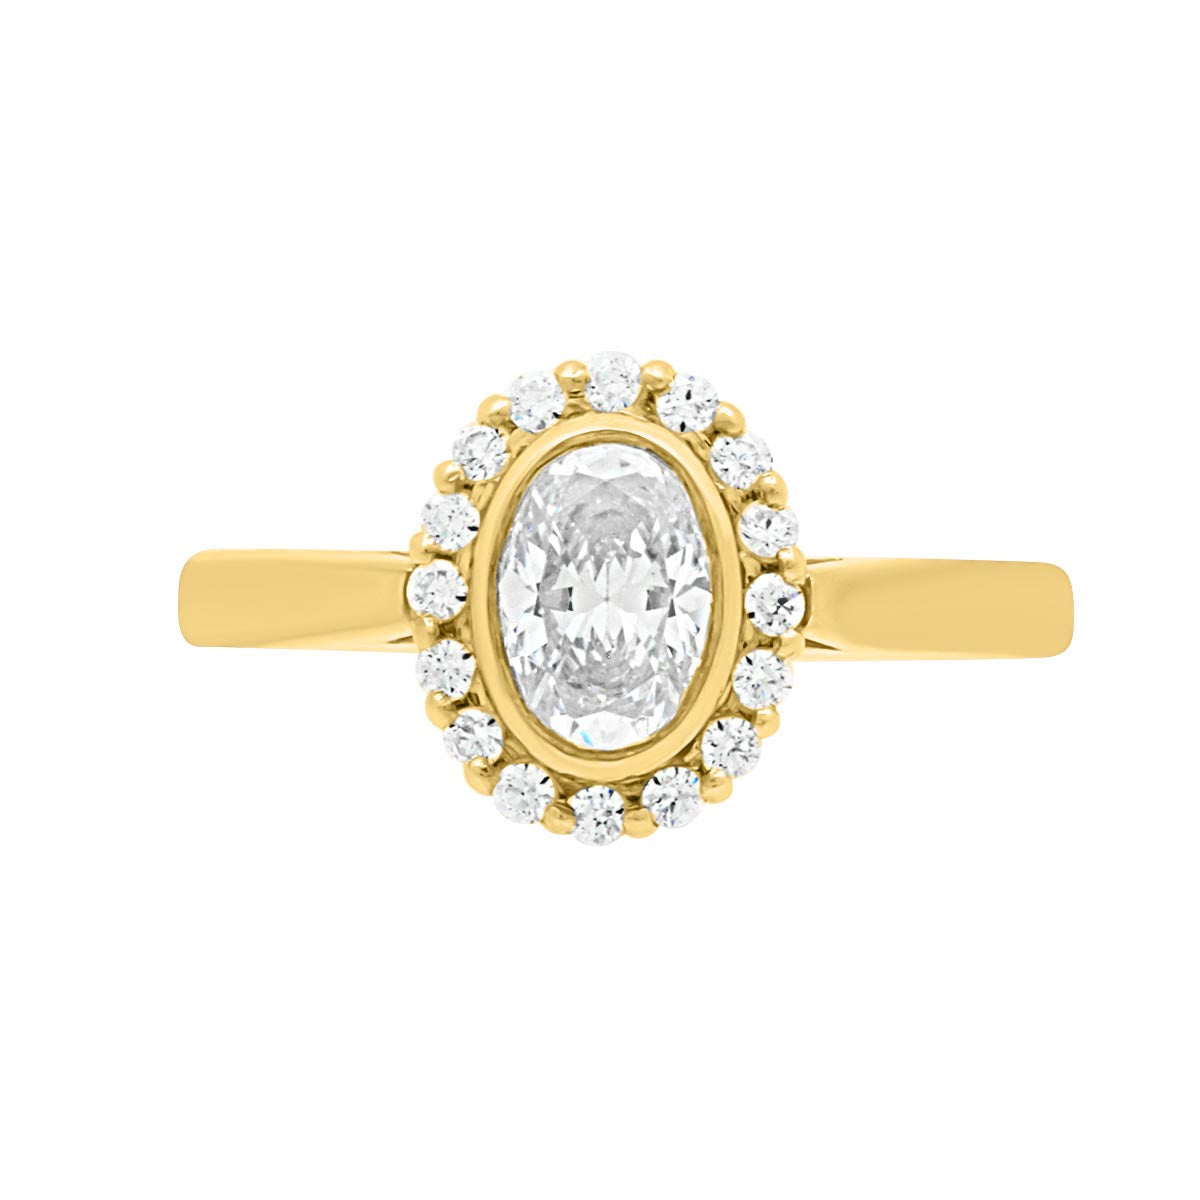  Oval Halo Diamond Ring in yellow gold